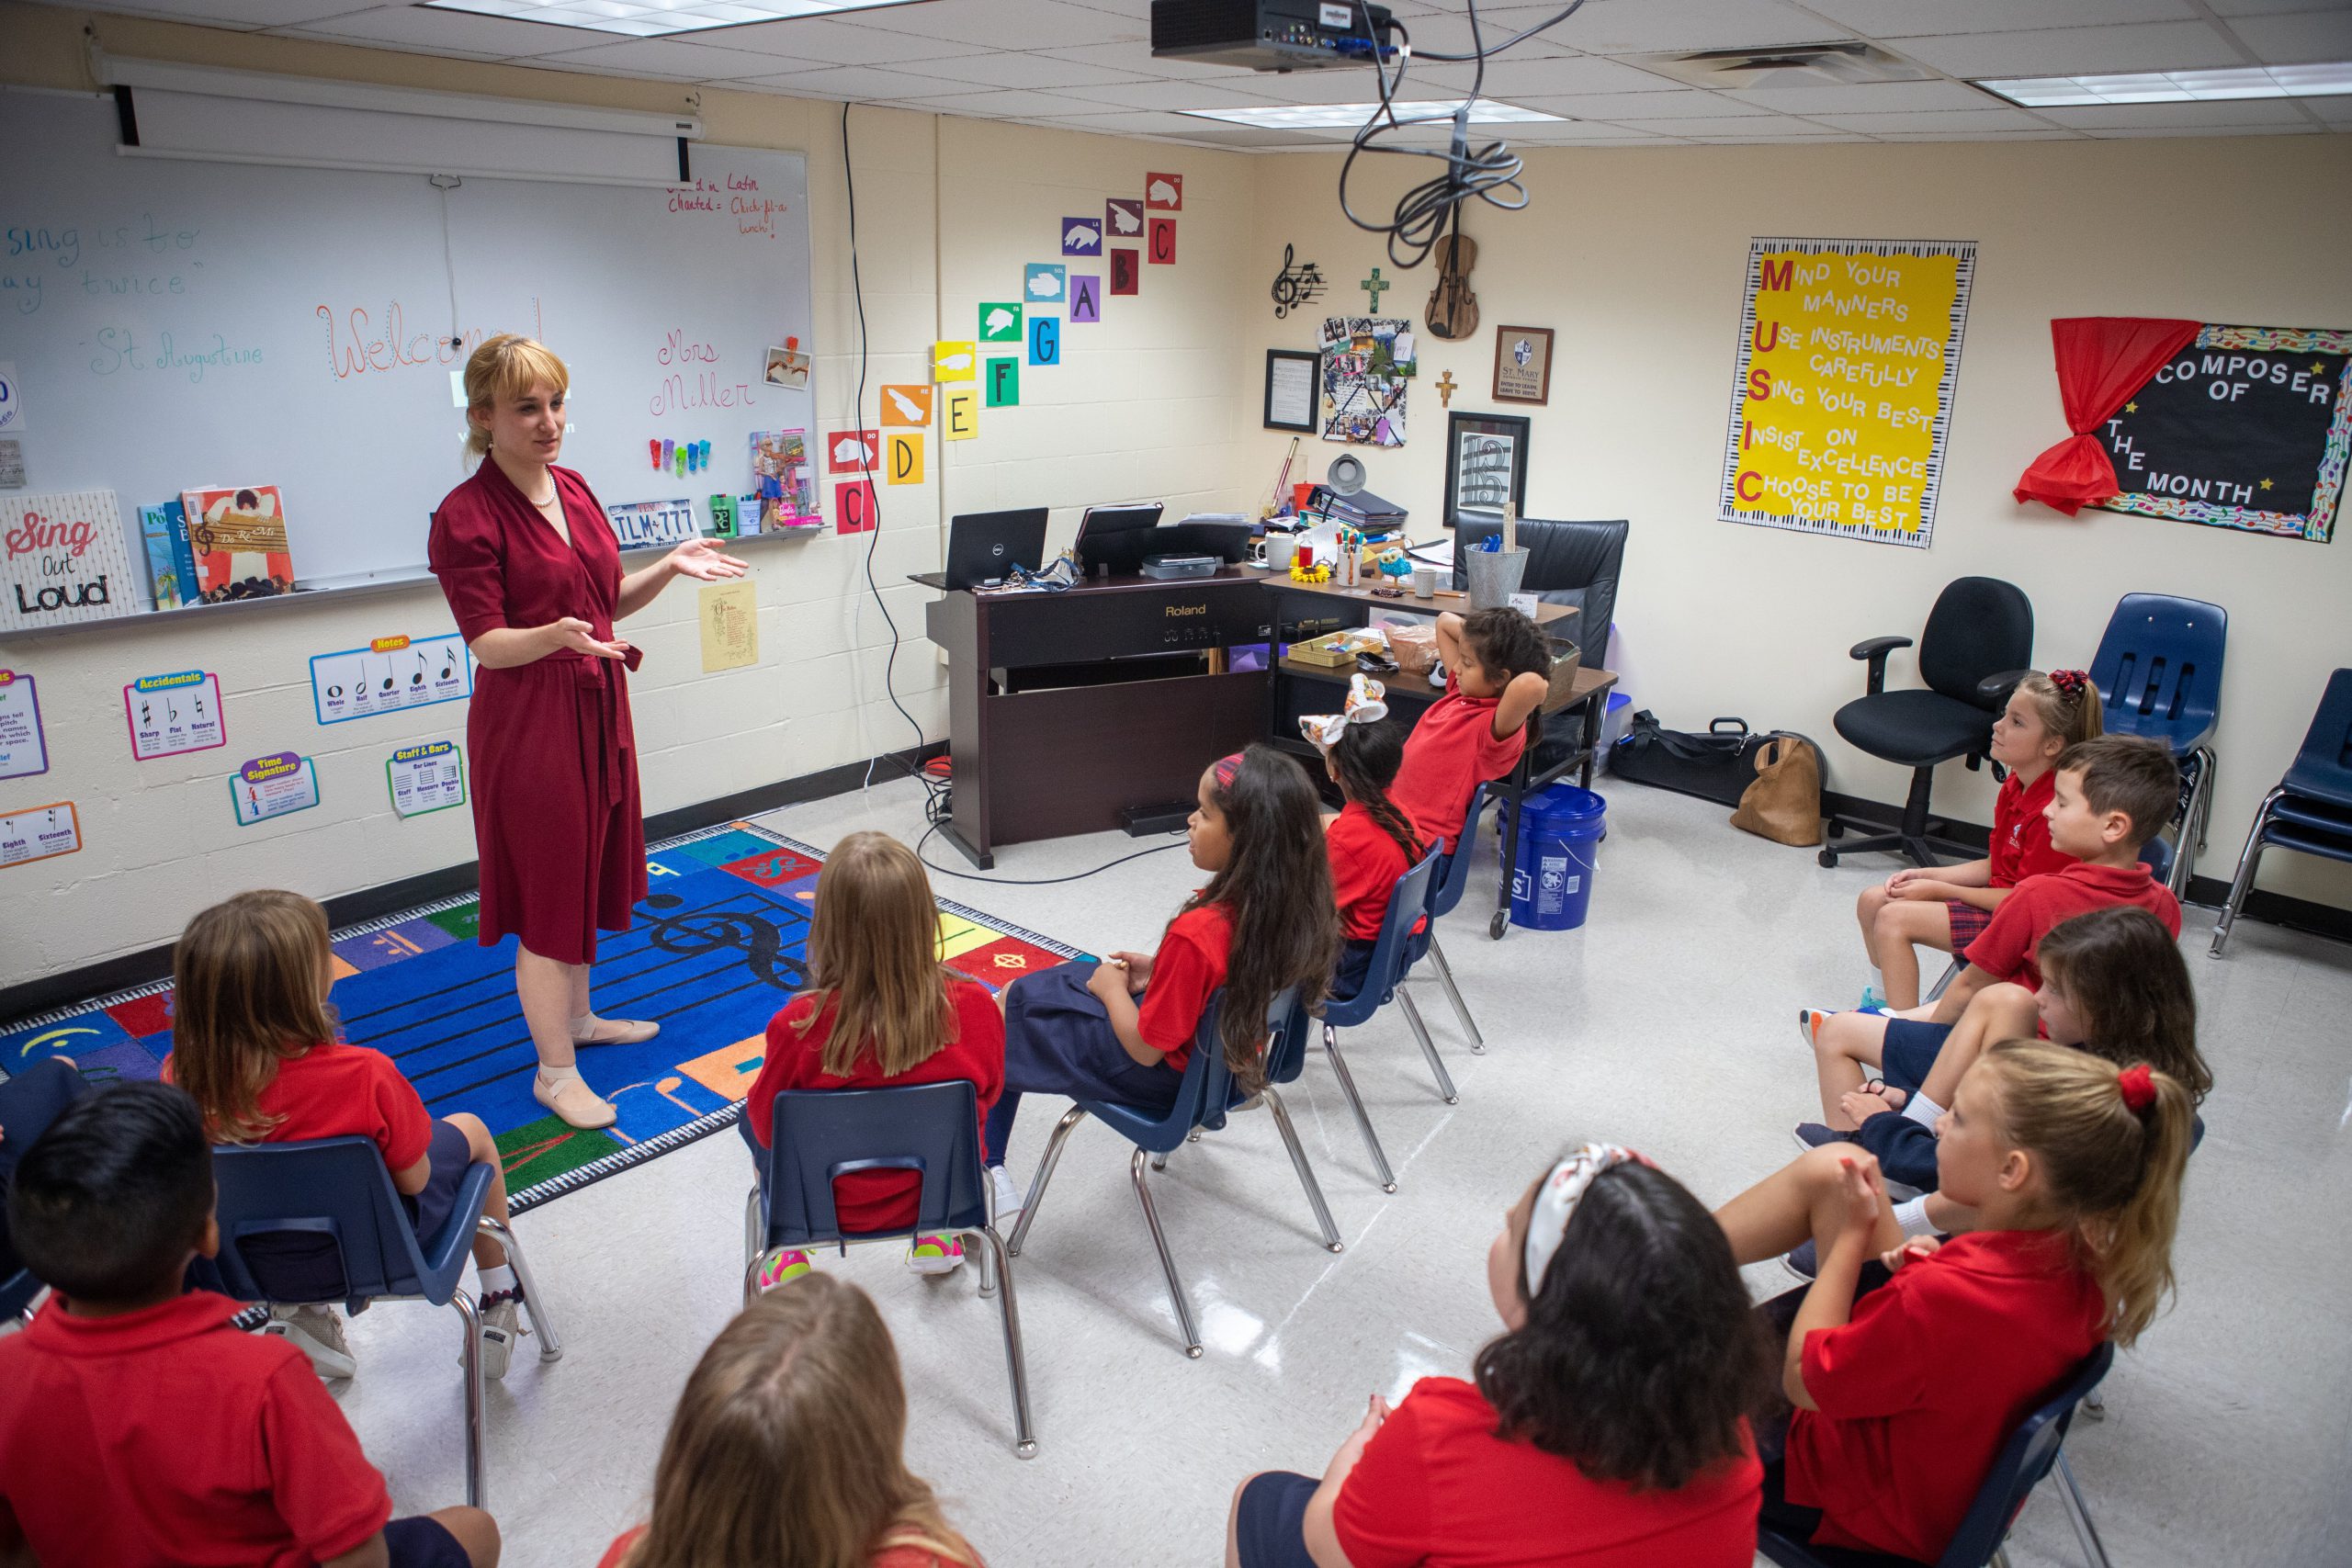 Megan Miller, a music teacher and orchestra director, teaches during an Aug. 12, 2019, class session at St. Mary Catholic School in League City, Texas. Miller was one of nearly 75 educators to attend a recent continuing education and development day for art and music teachers hosted by the Catholic Schools Office and the Co-Cathedral of the Sacred Heart in Houston. (CNS photo/James Ramos, Texas Catholic Herald)